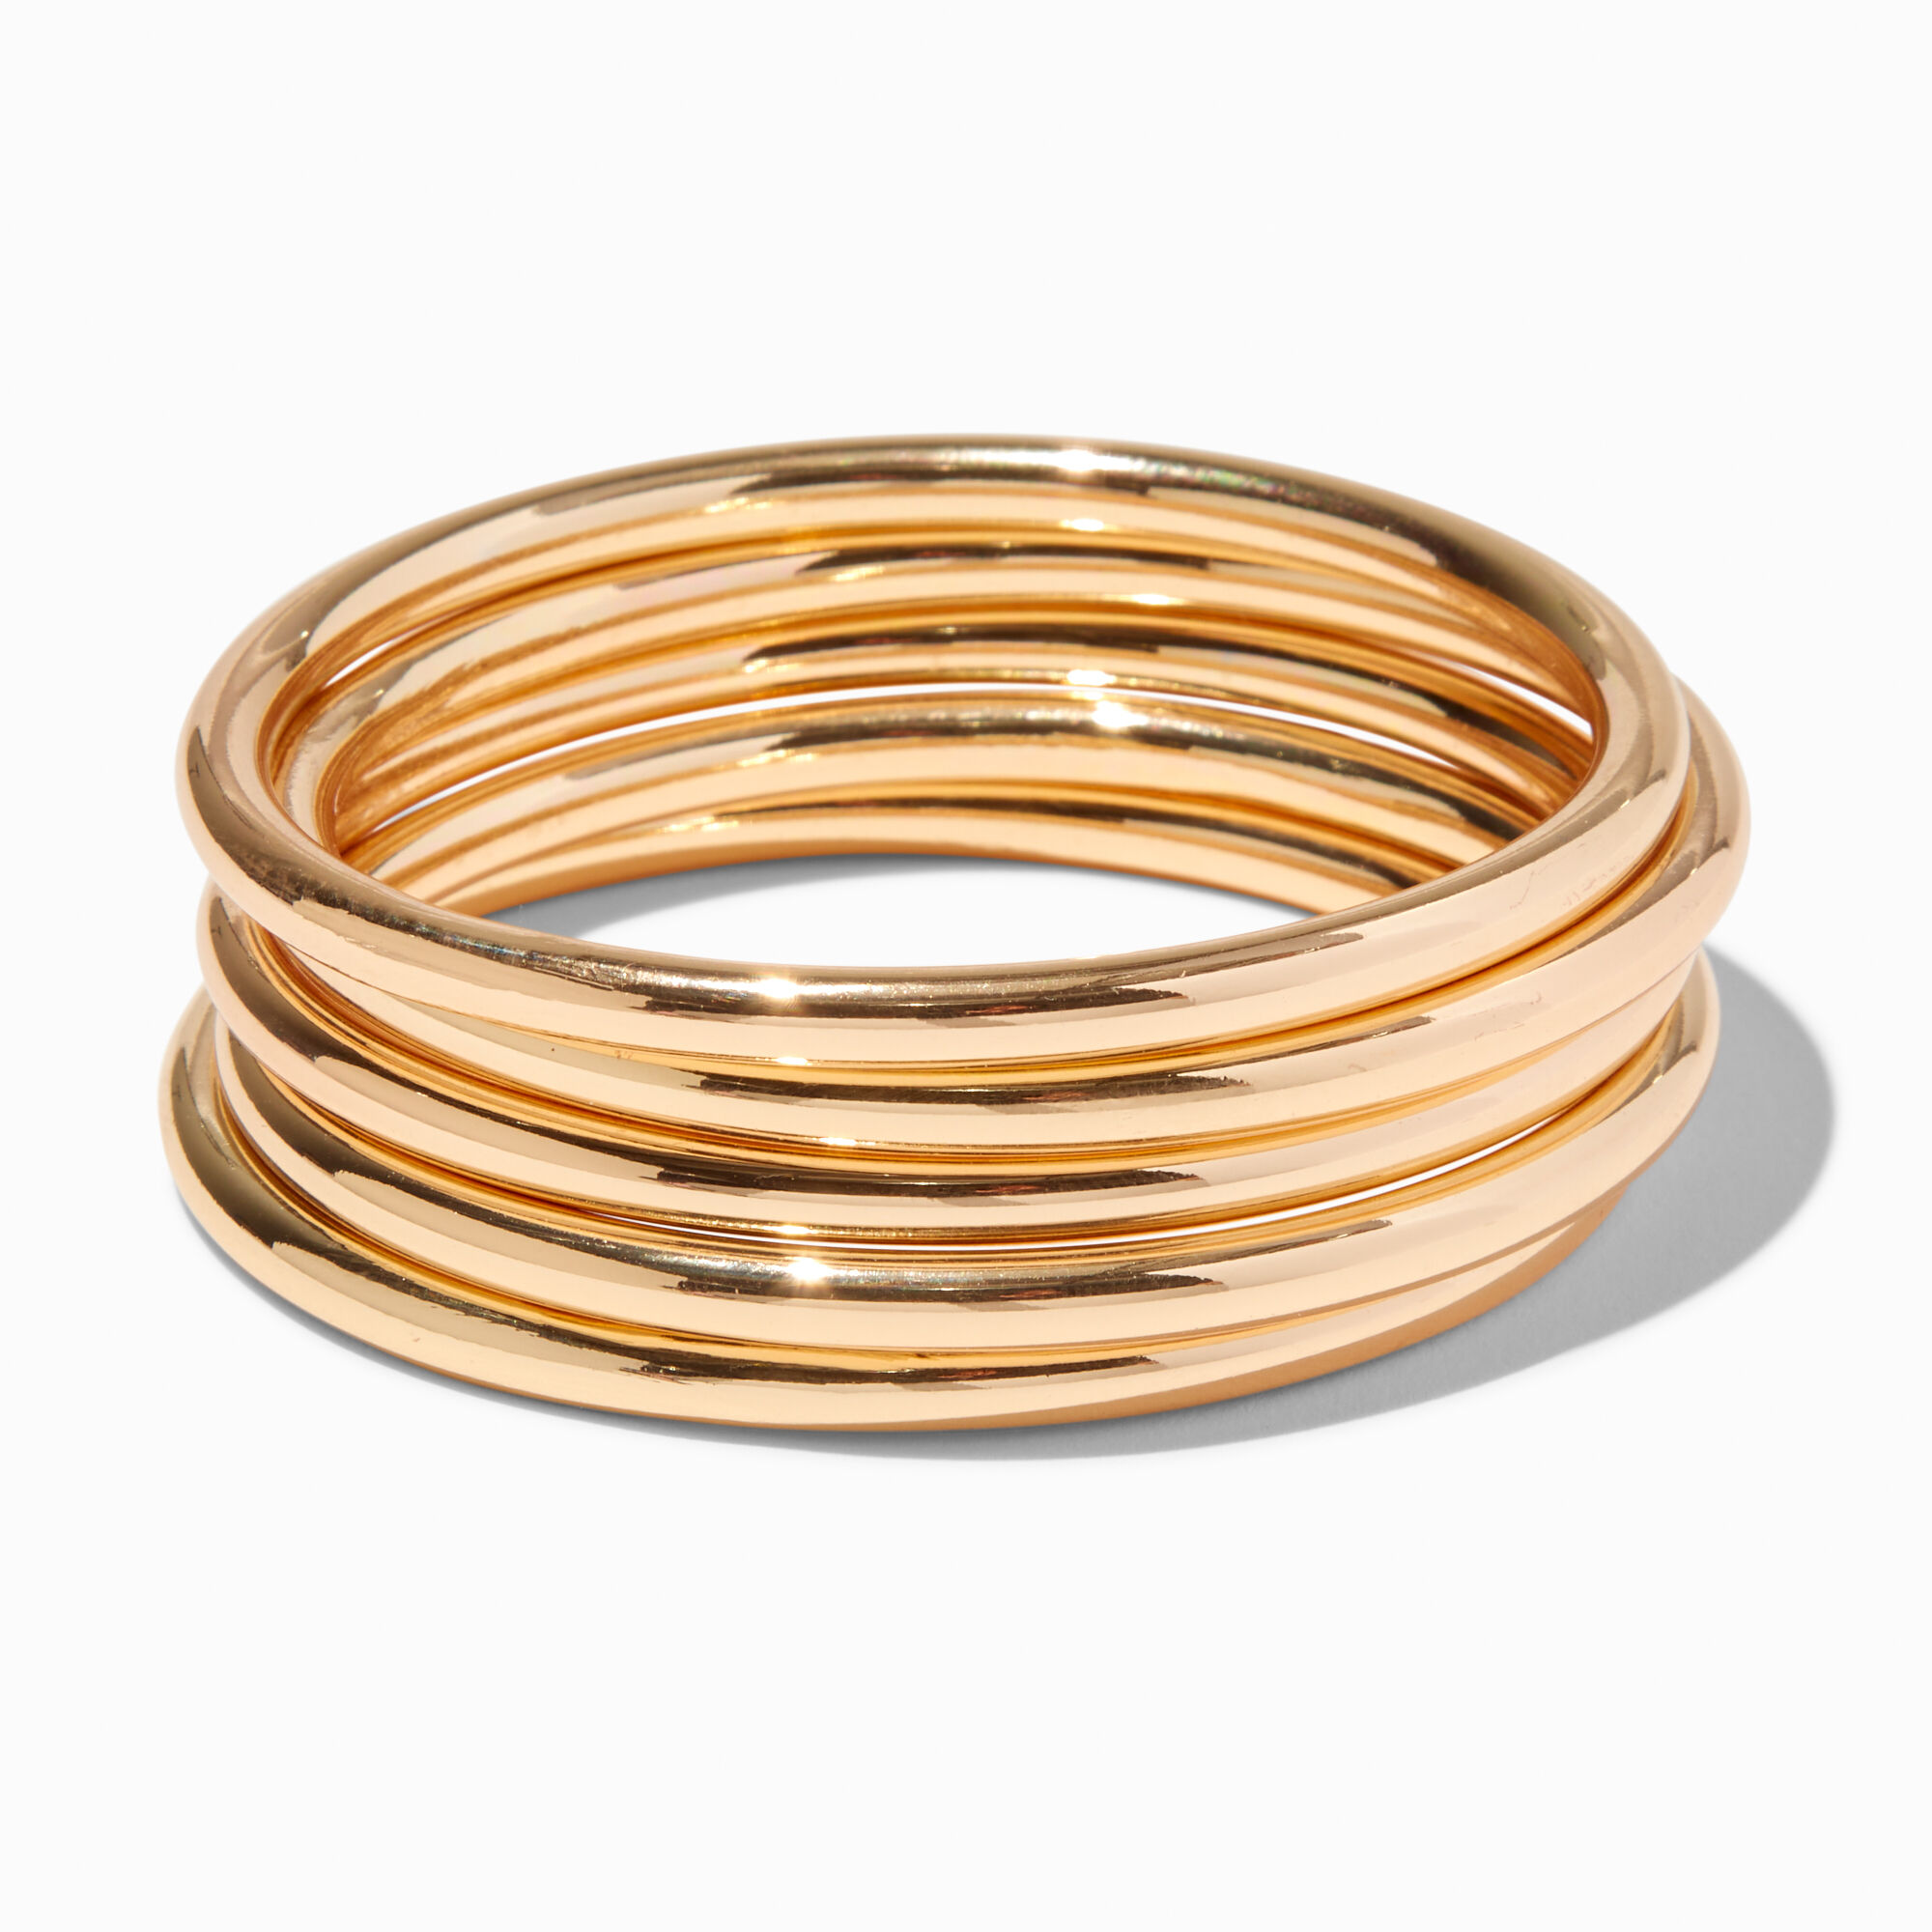 View Claires Tone Thick Bangle Bracelets 5 Pack Gold information